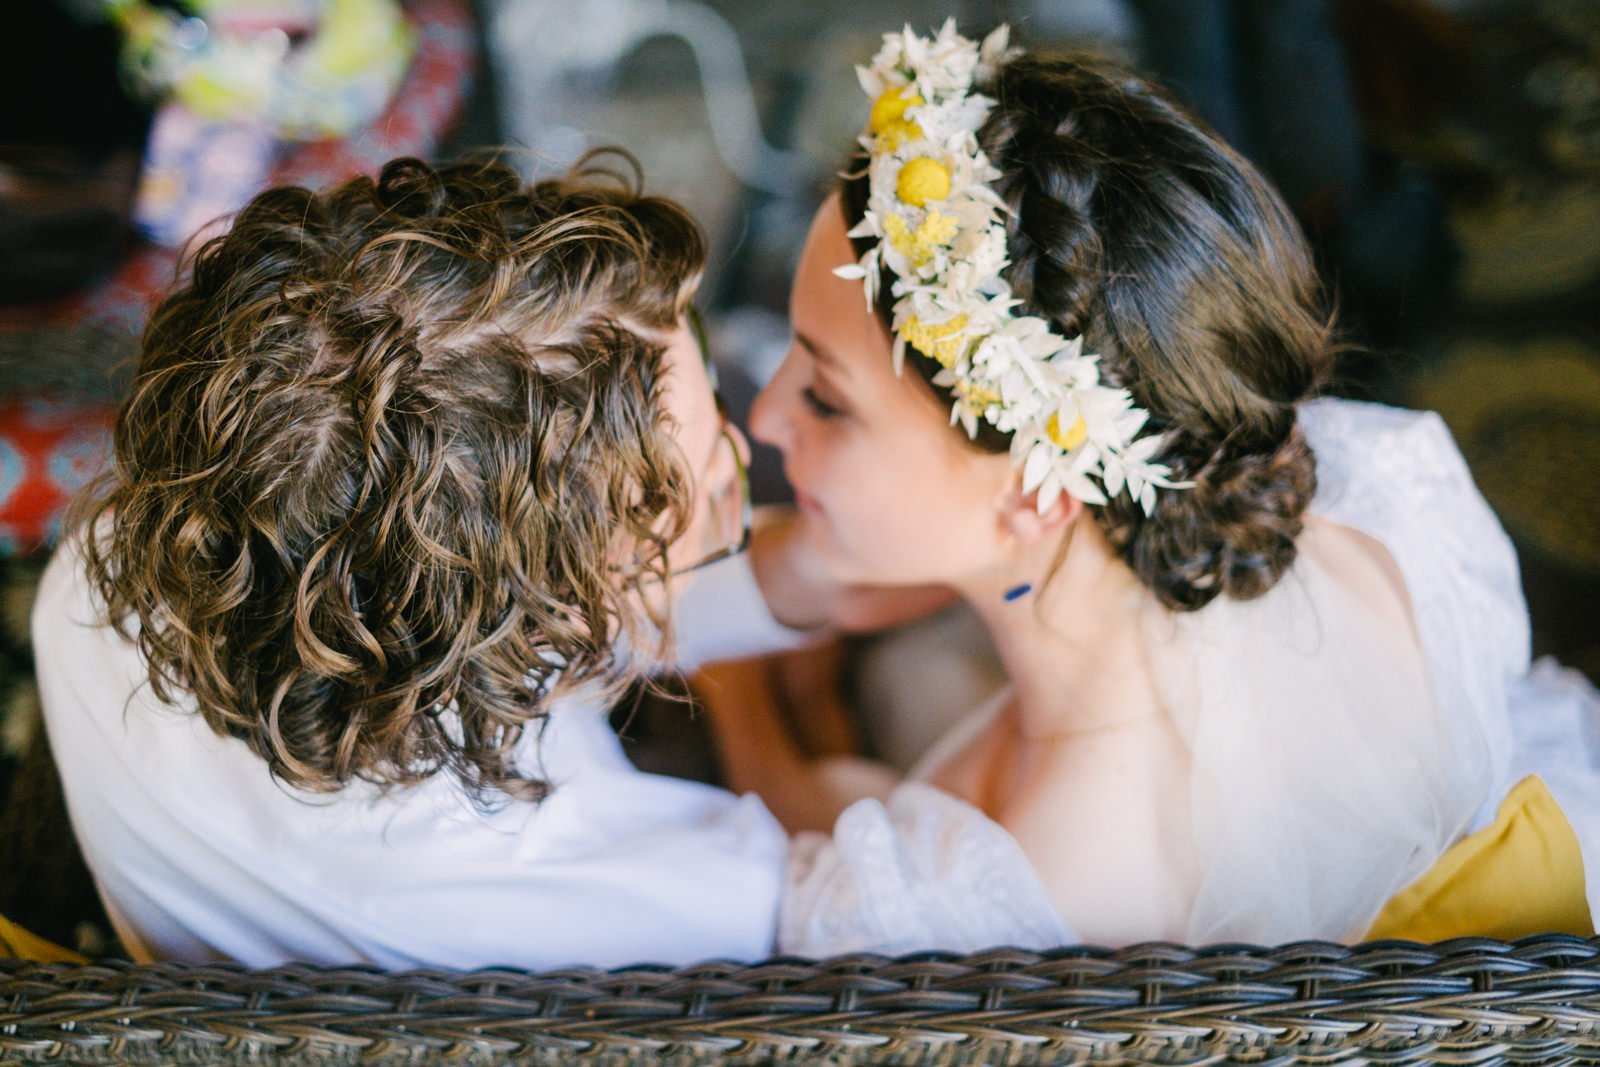  Bride with flower crown sits almost kisses 